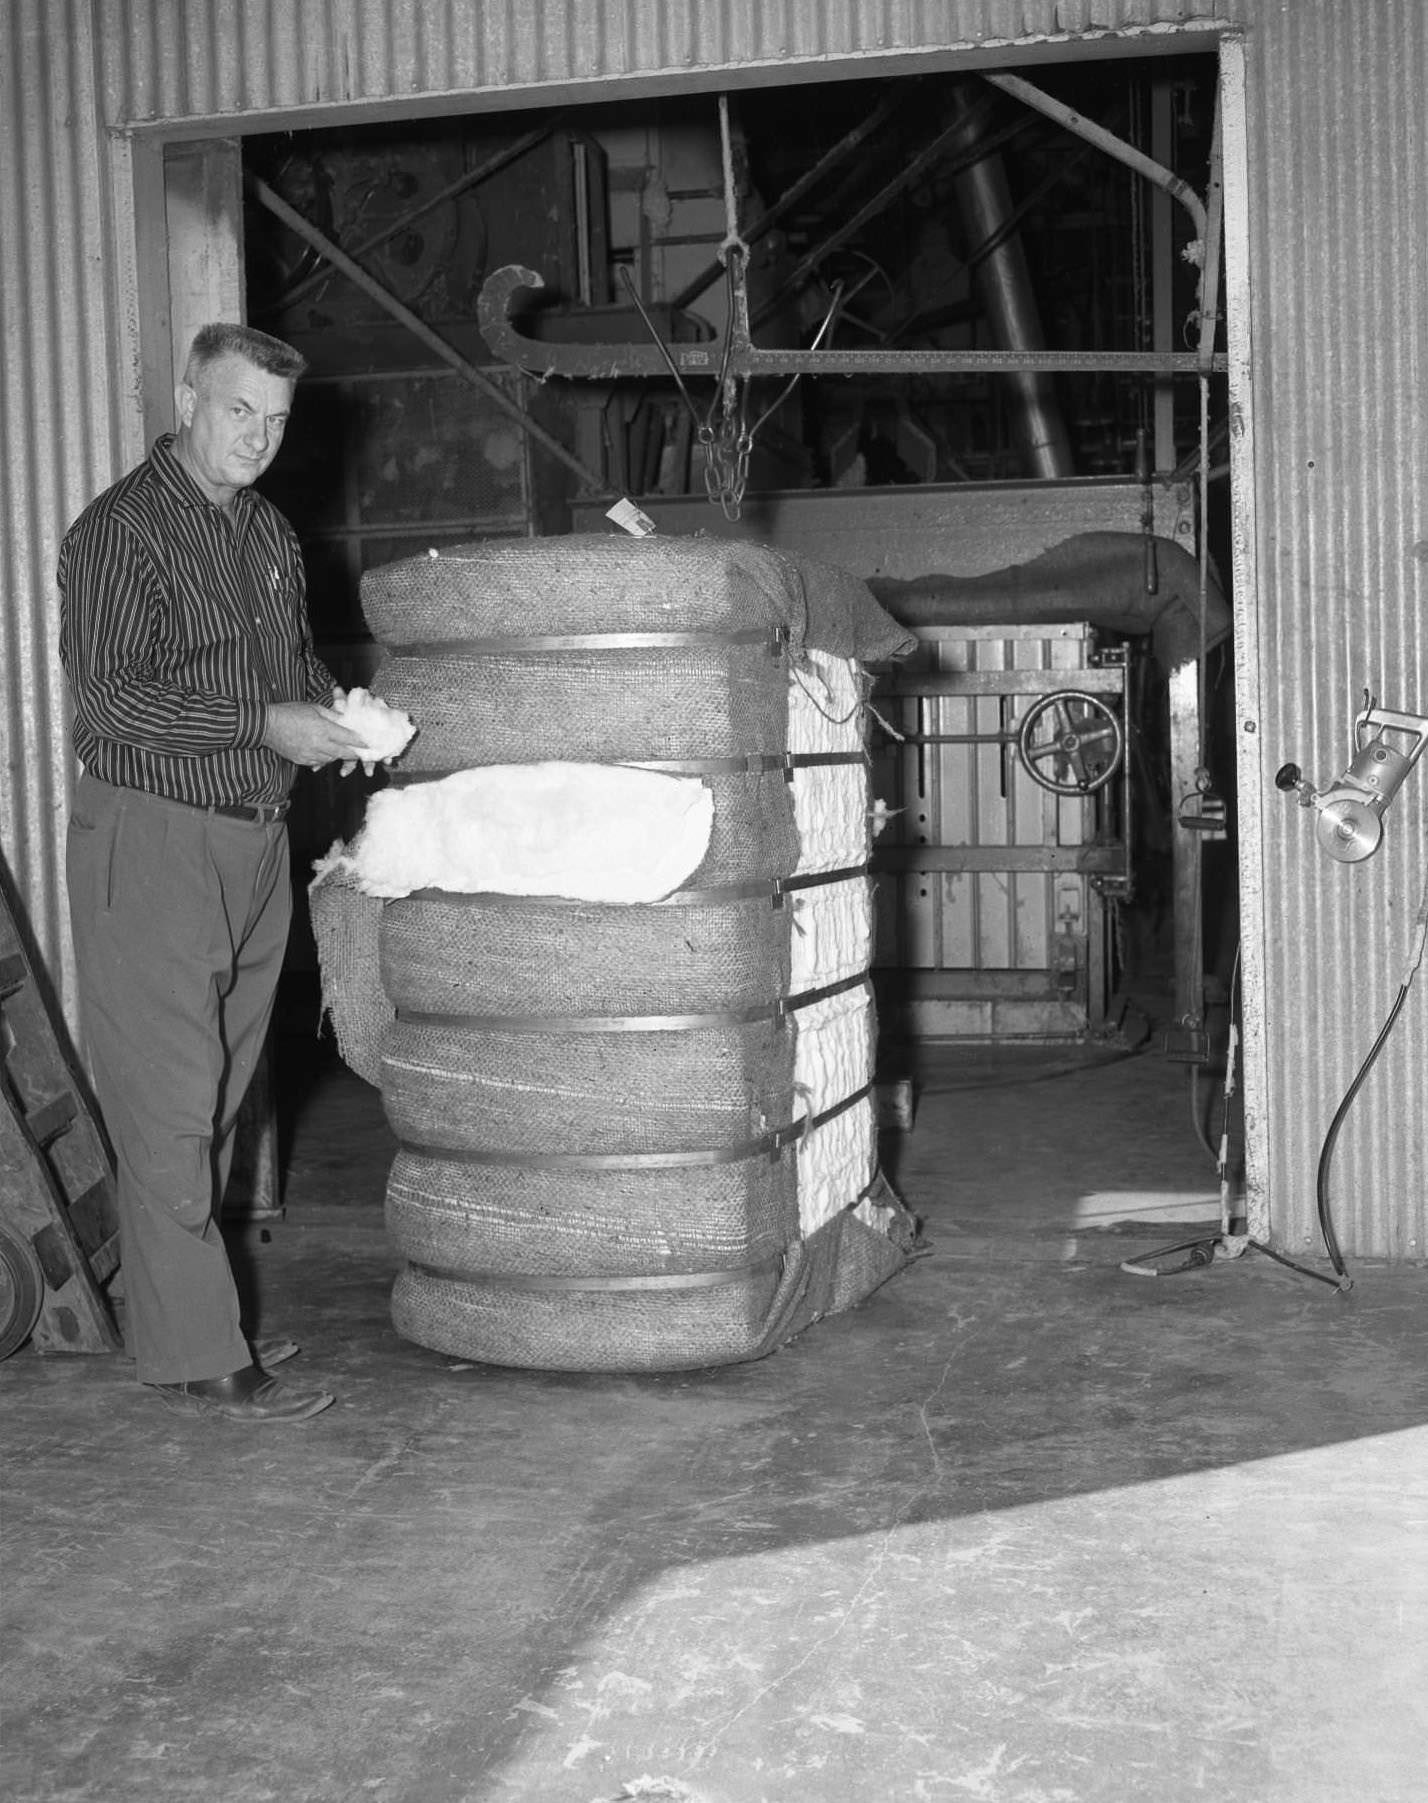 Man Holding Cotton at Cotton Gin, 1958